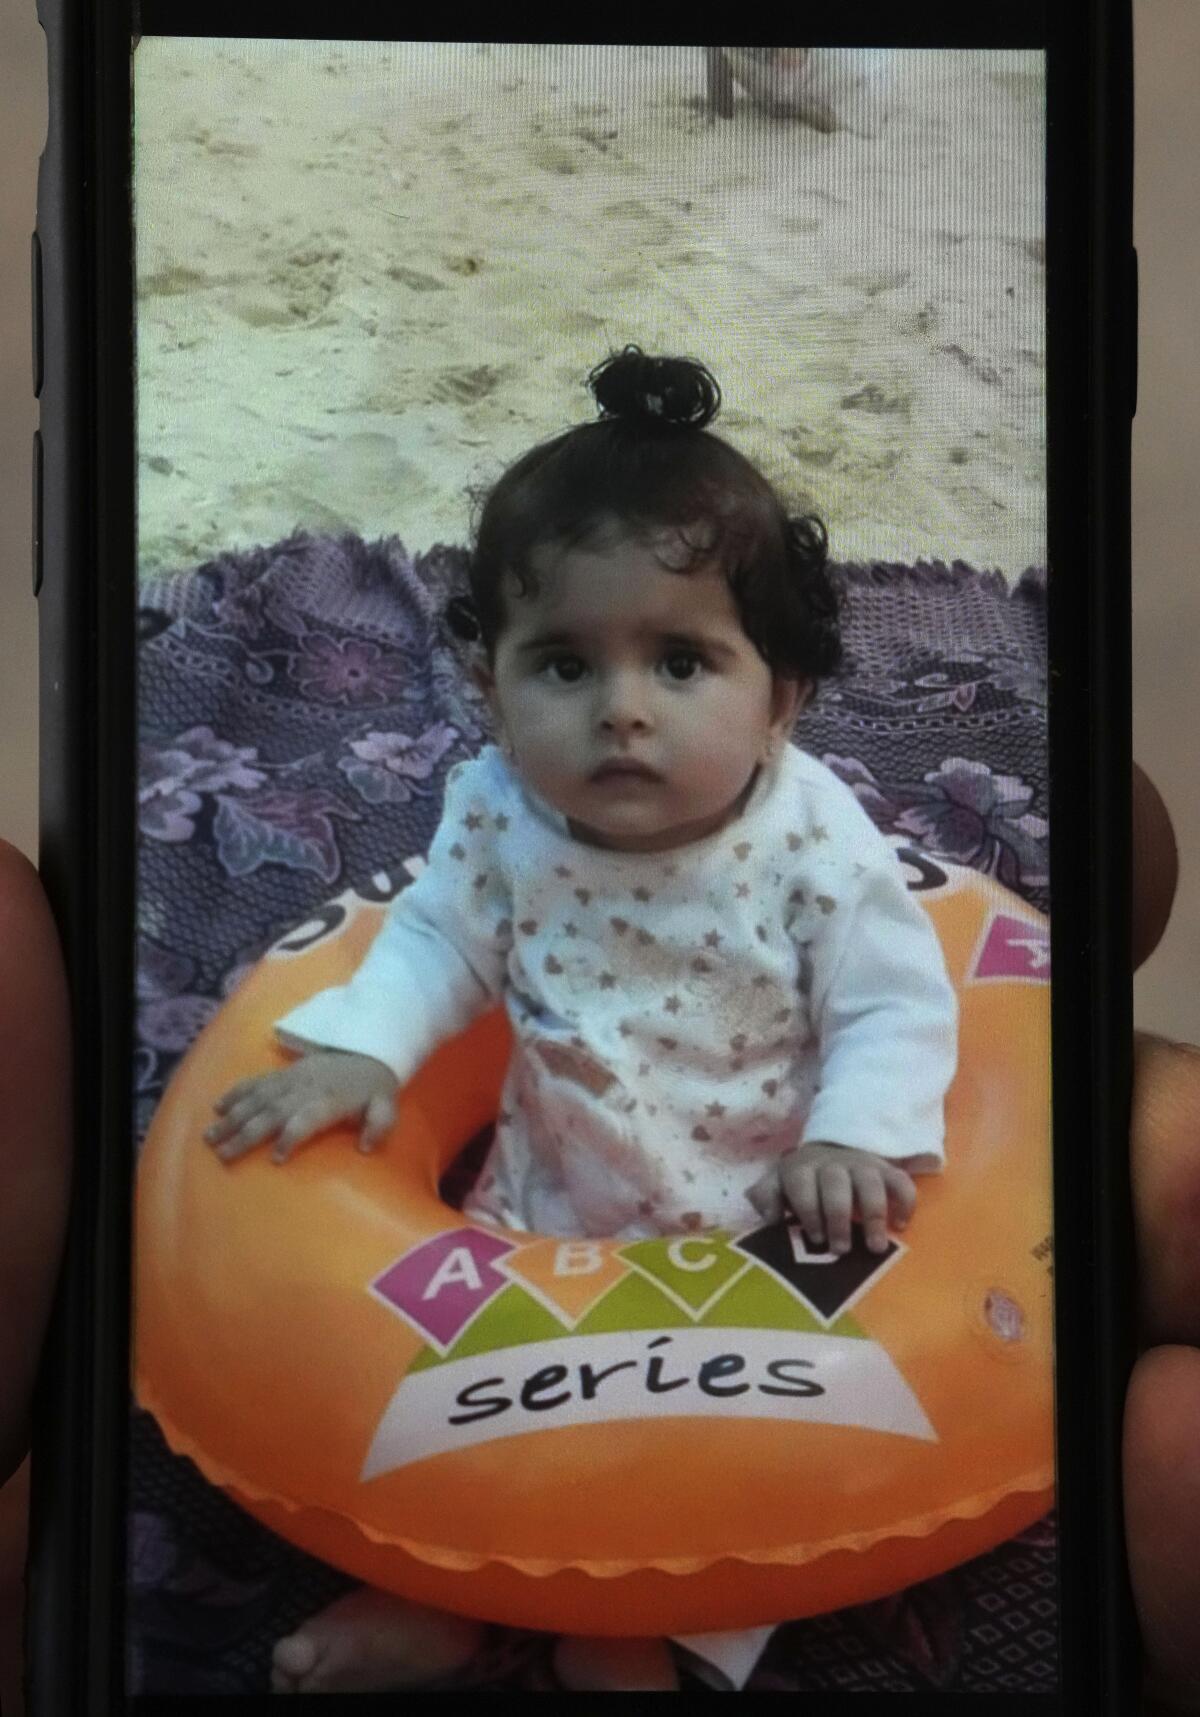 A phone showing a photo of a curly-haired baby girl sitting in an inflated toy on a rug